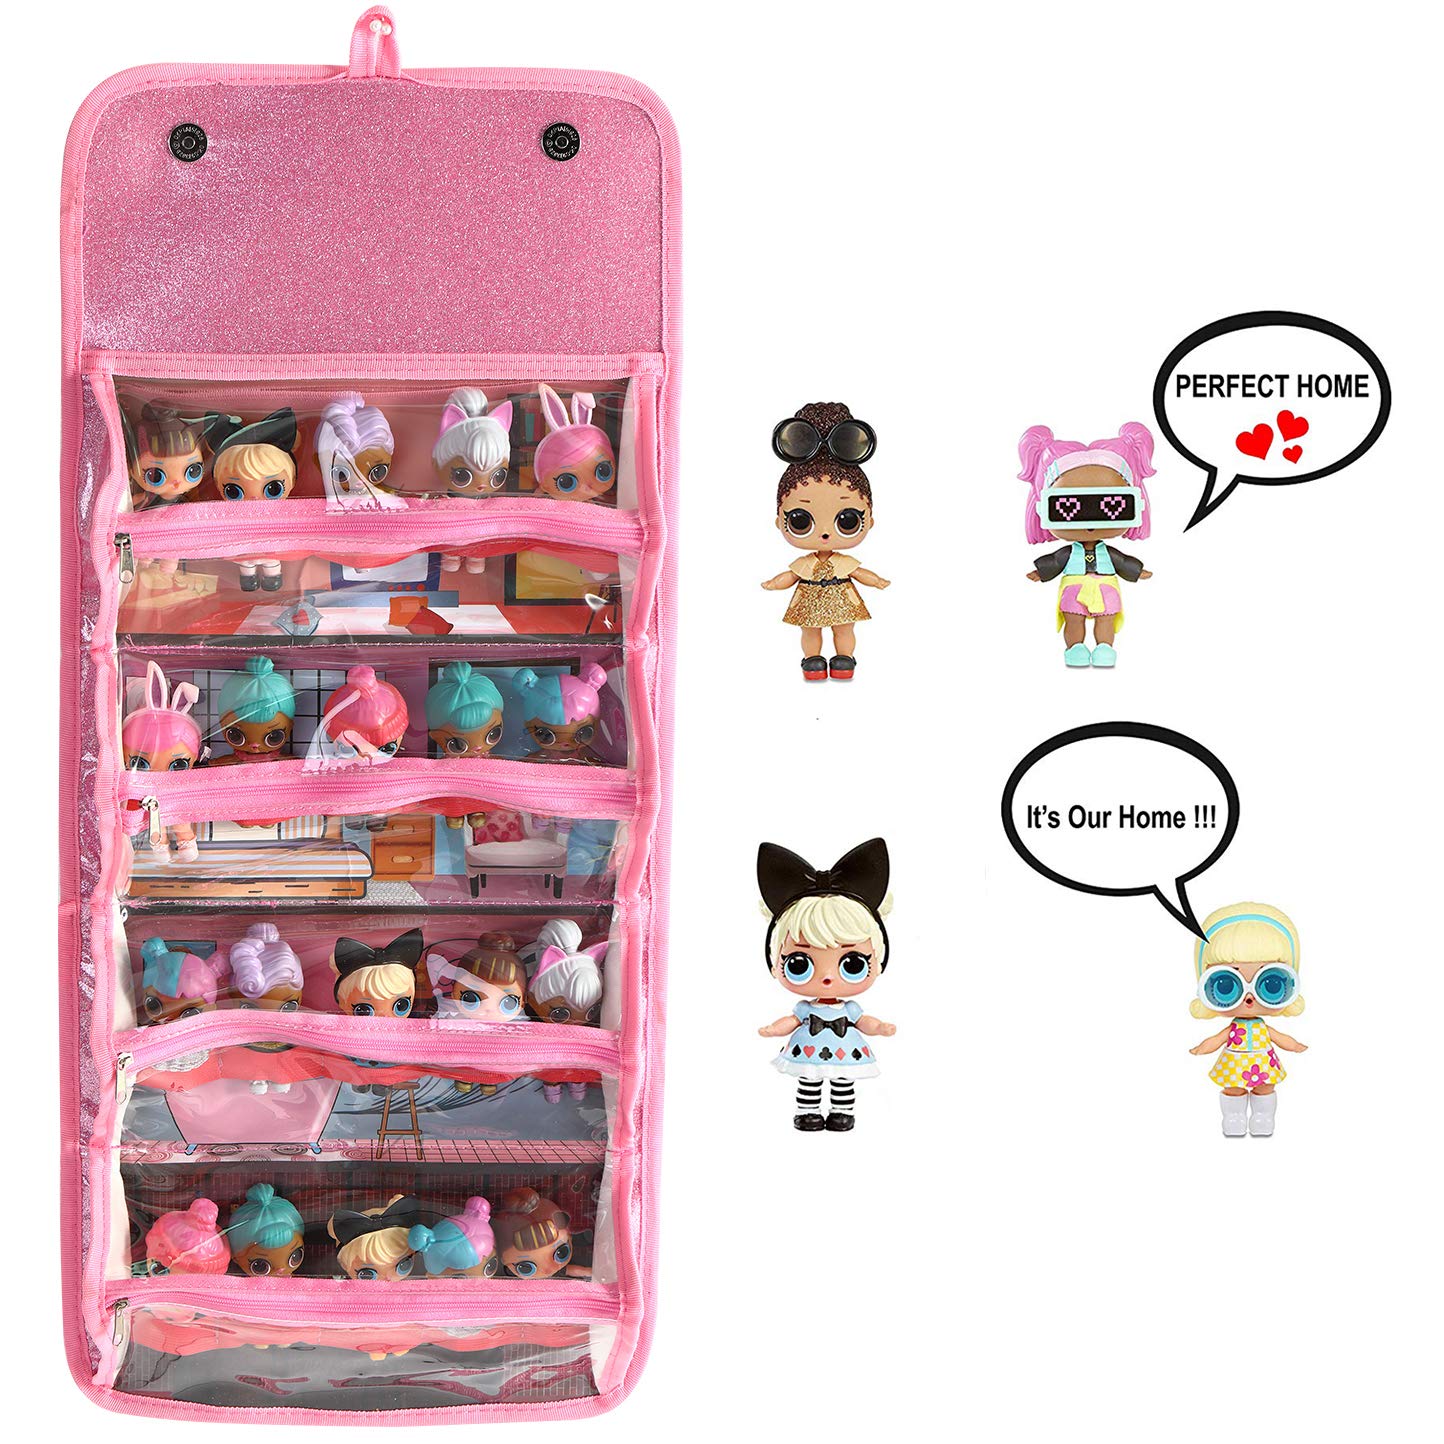 Leeche Storages & Display Case for Dolls Compatible with All LOL Surprise Dolls,Easy Carrying Storage Organizer Clear View Case